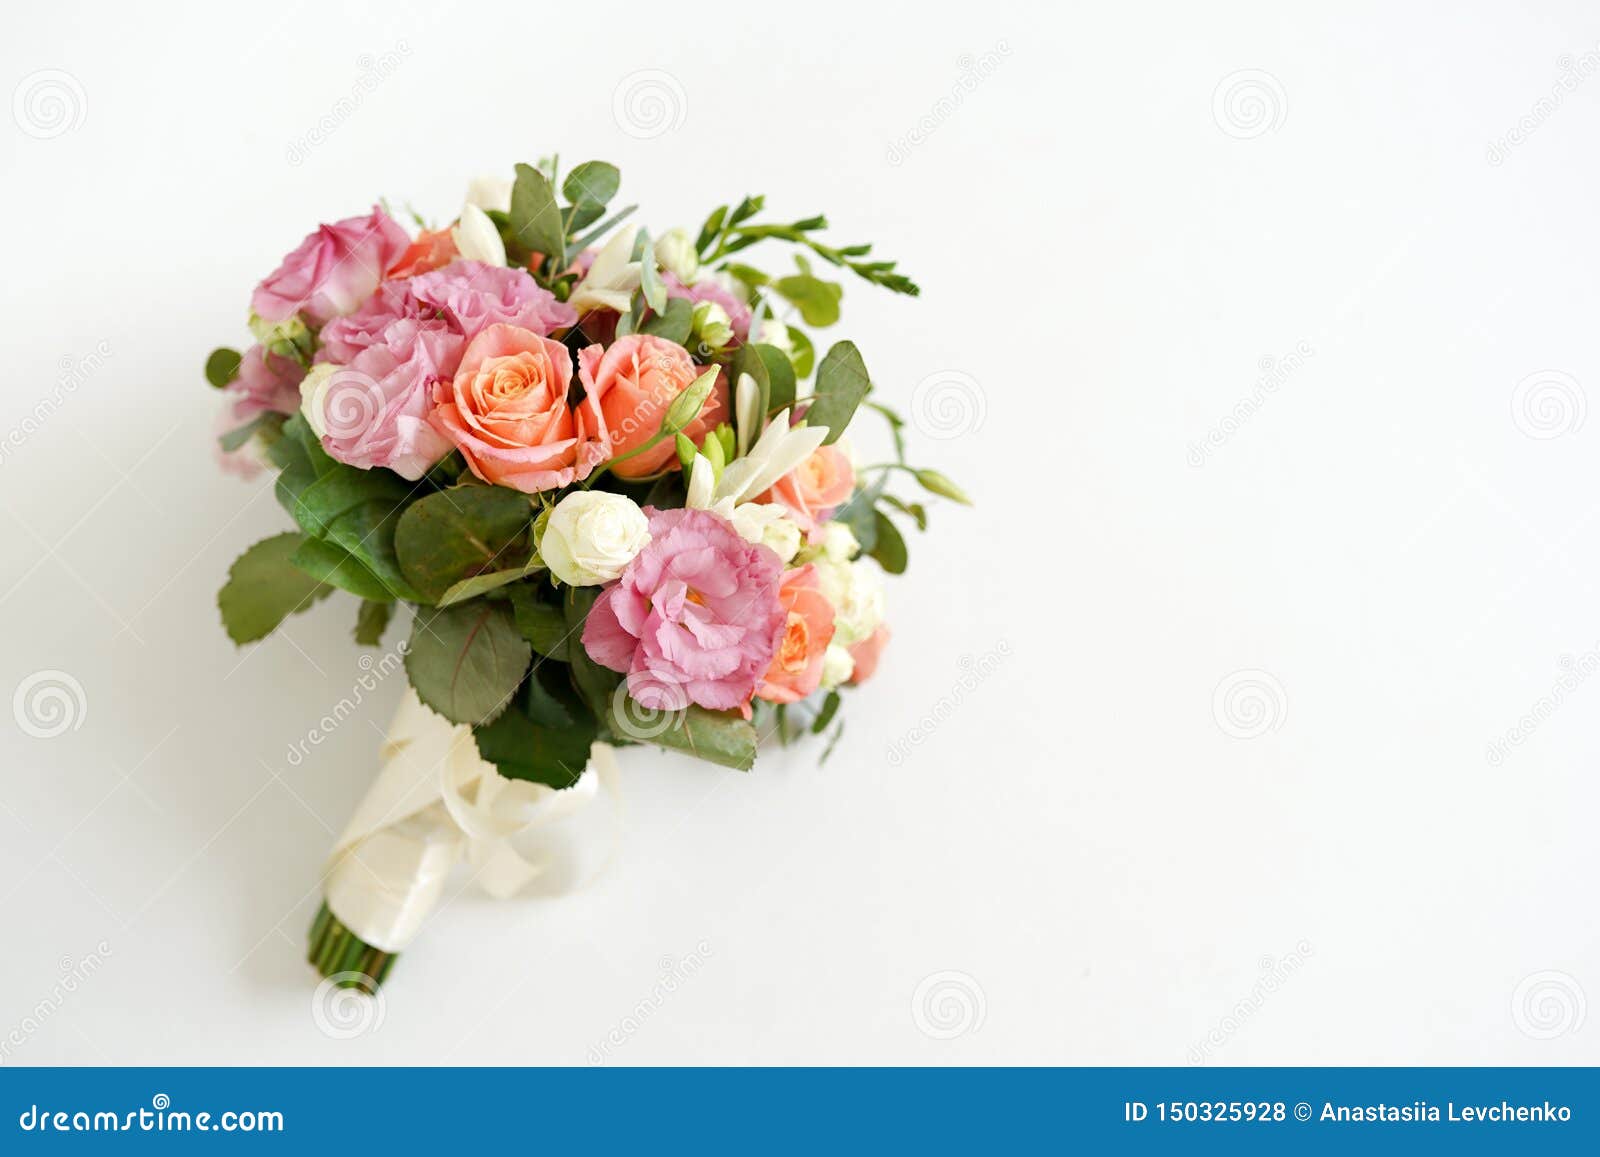 Wedding Bouquet with Flowers Roses on a White Background with Copy